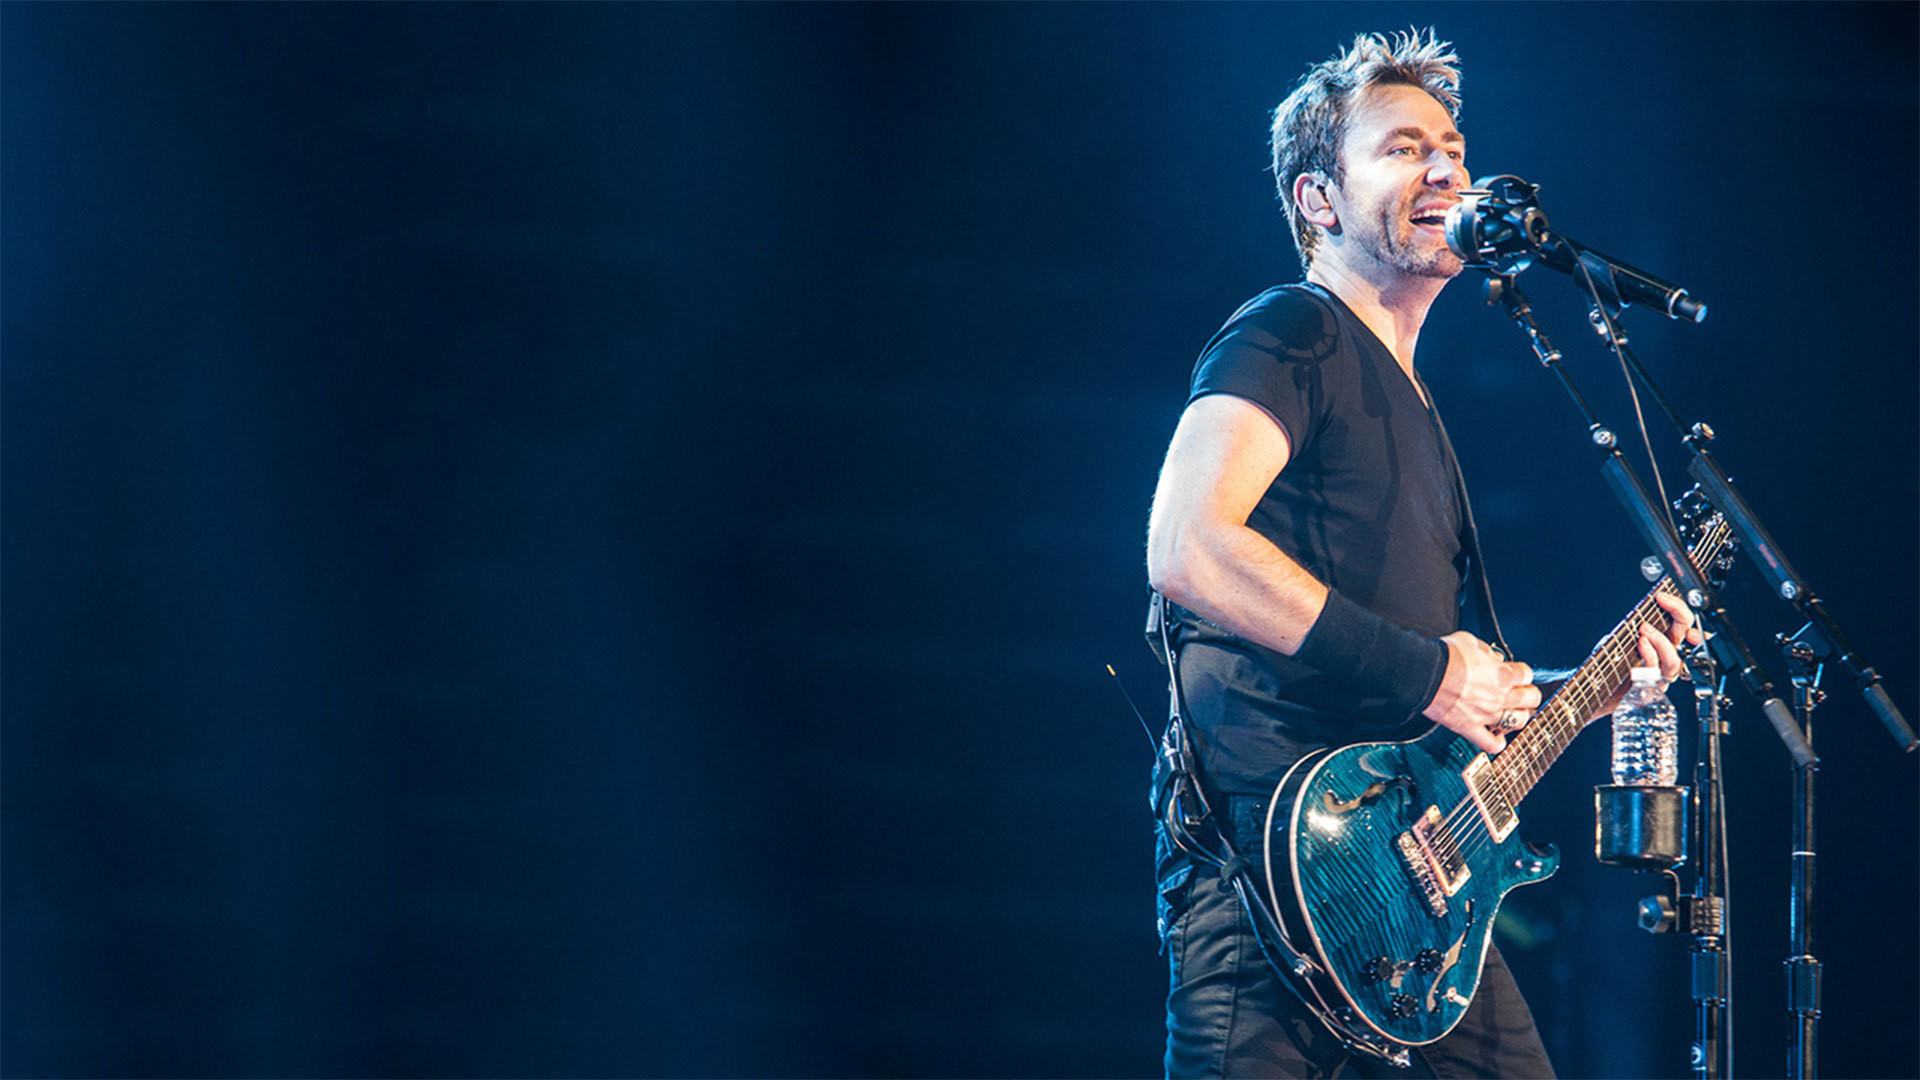 1920x1080 Nickelback Wallpapers Images Photos Pictures Backgrounds